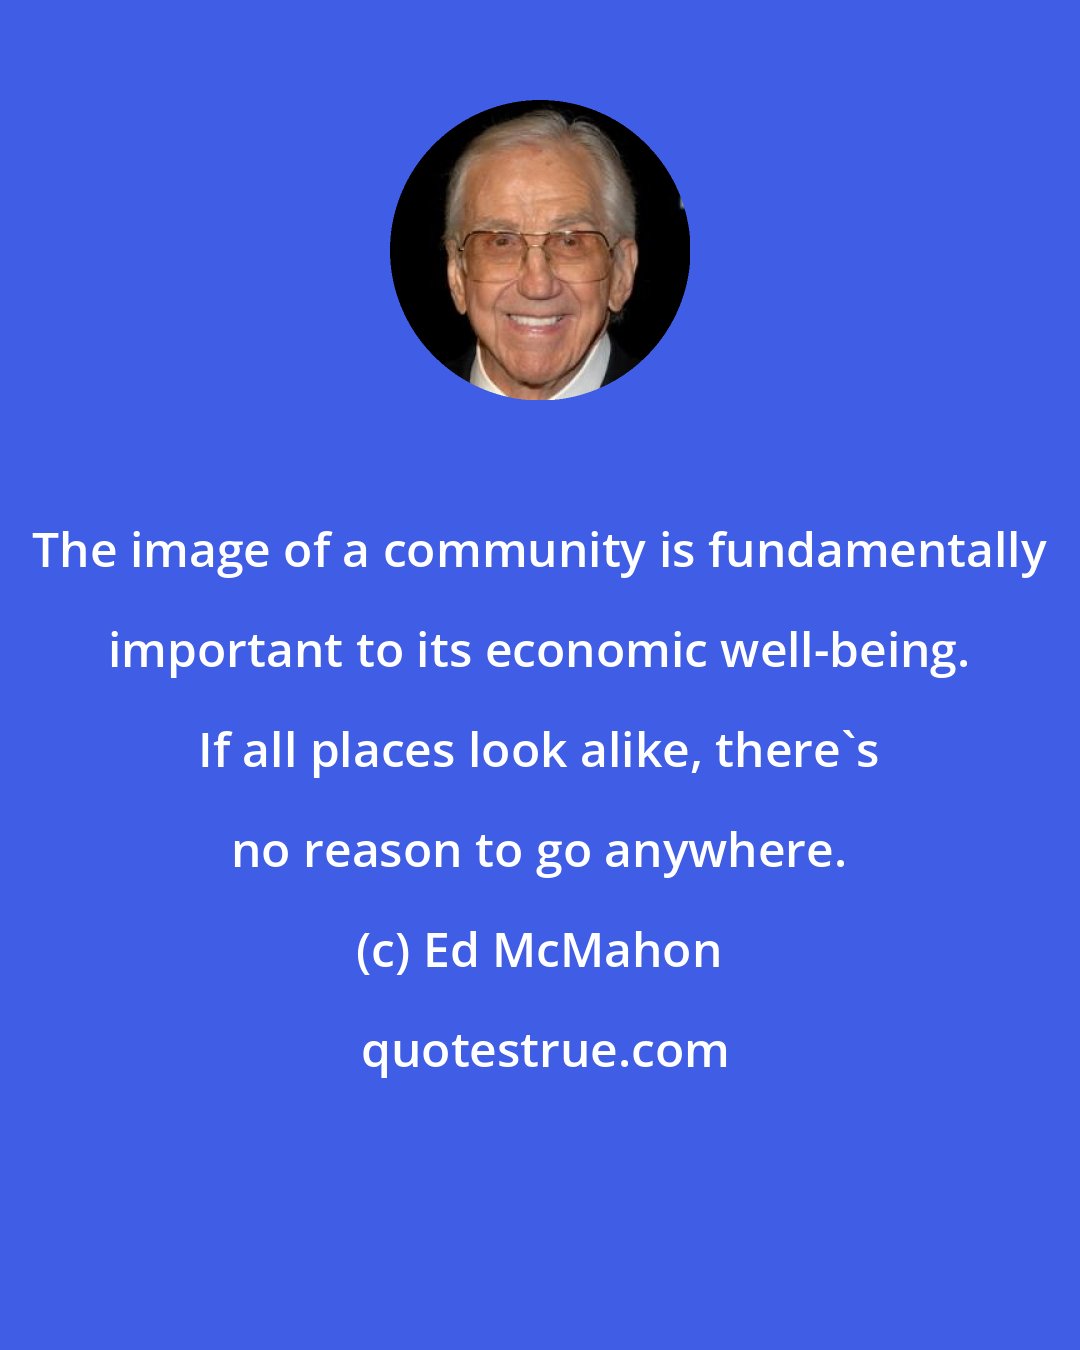 Ed McMahon: The image of a community is fundamentally important to its economic well-being. If all places look alike, there's no reason to go anywhere.